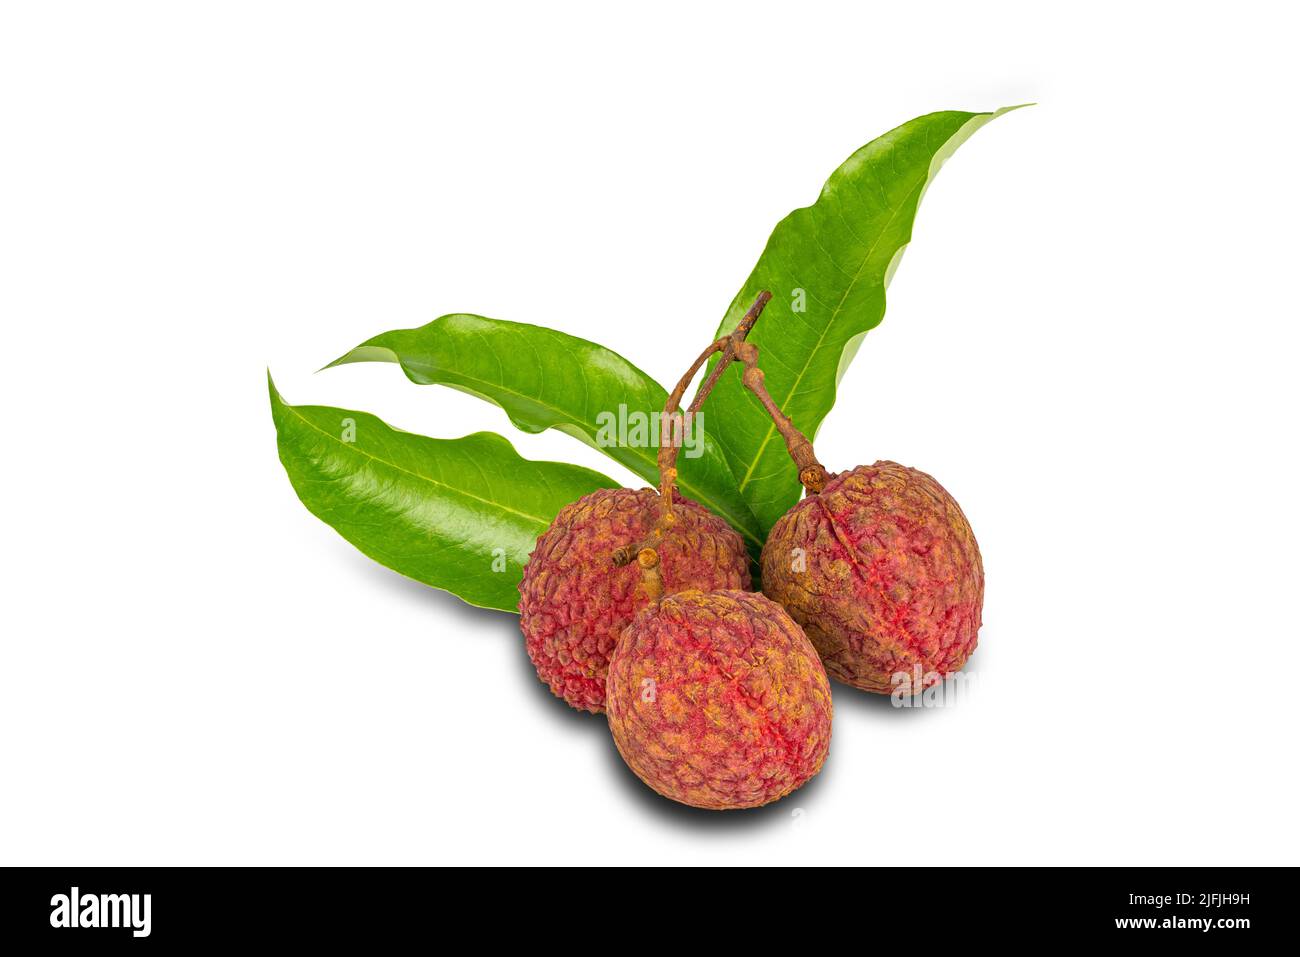 Bunch of lychee with green leaves isolated on white background with clipping path. Lychee is tropical fruit native to China and some country in southe Stock Photo